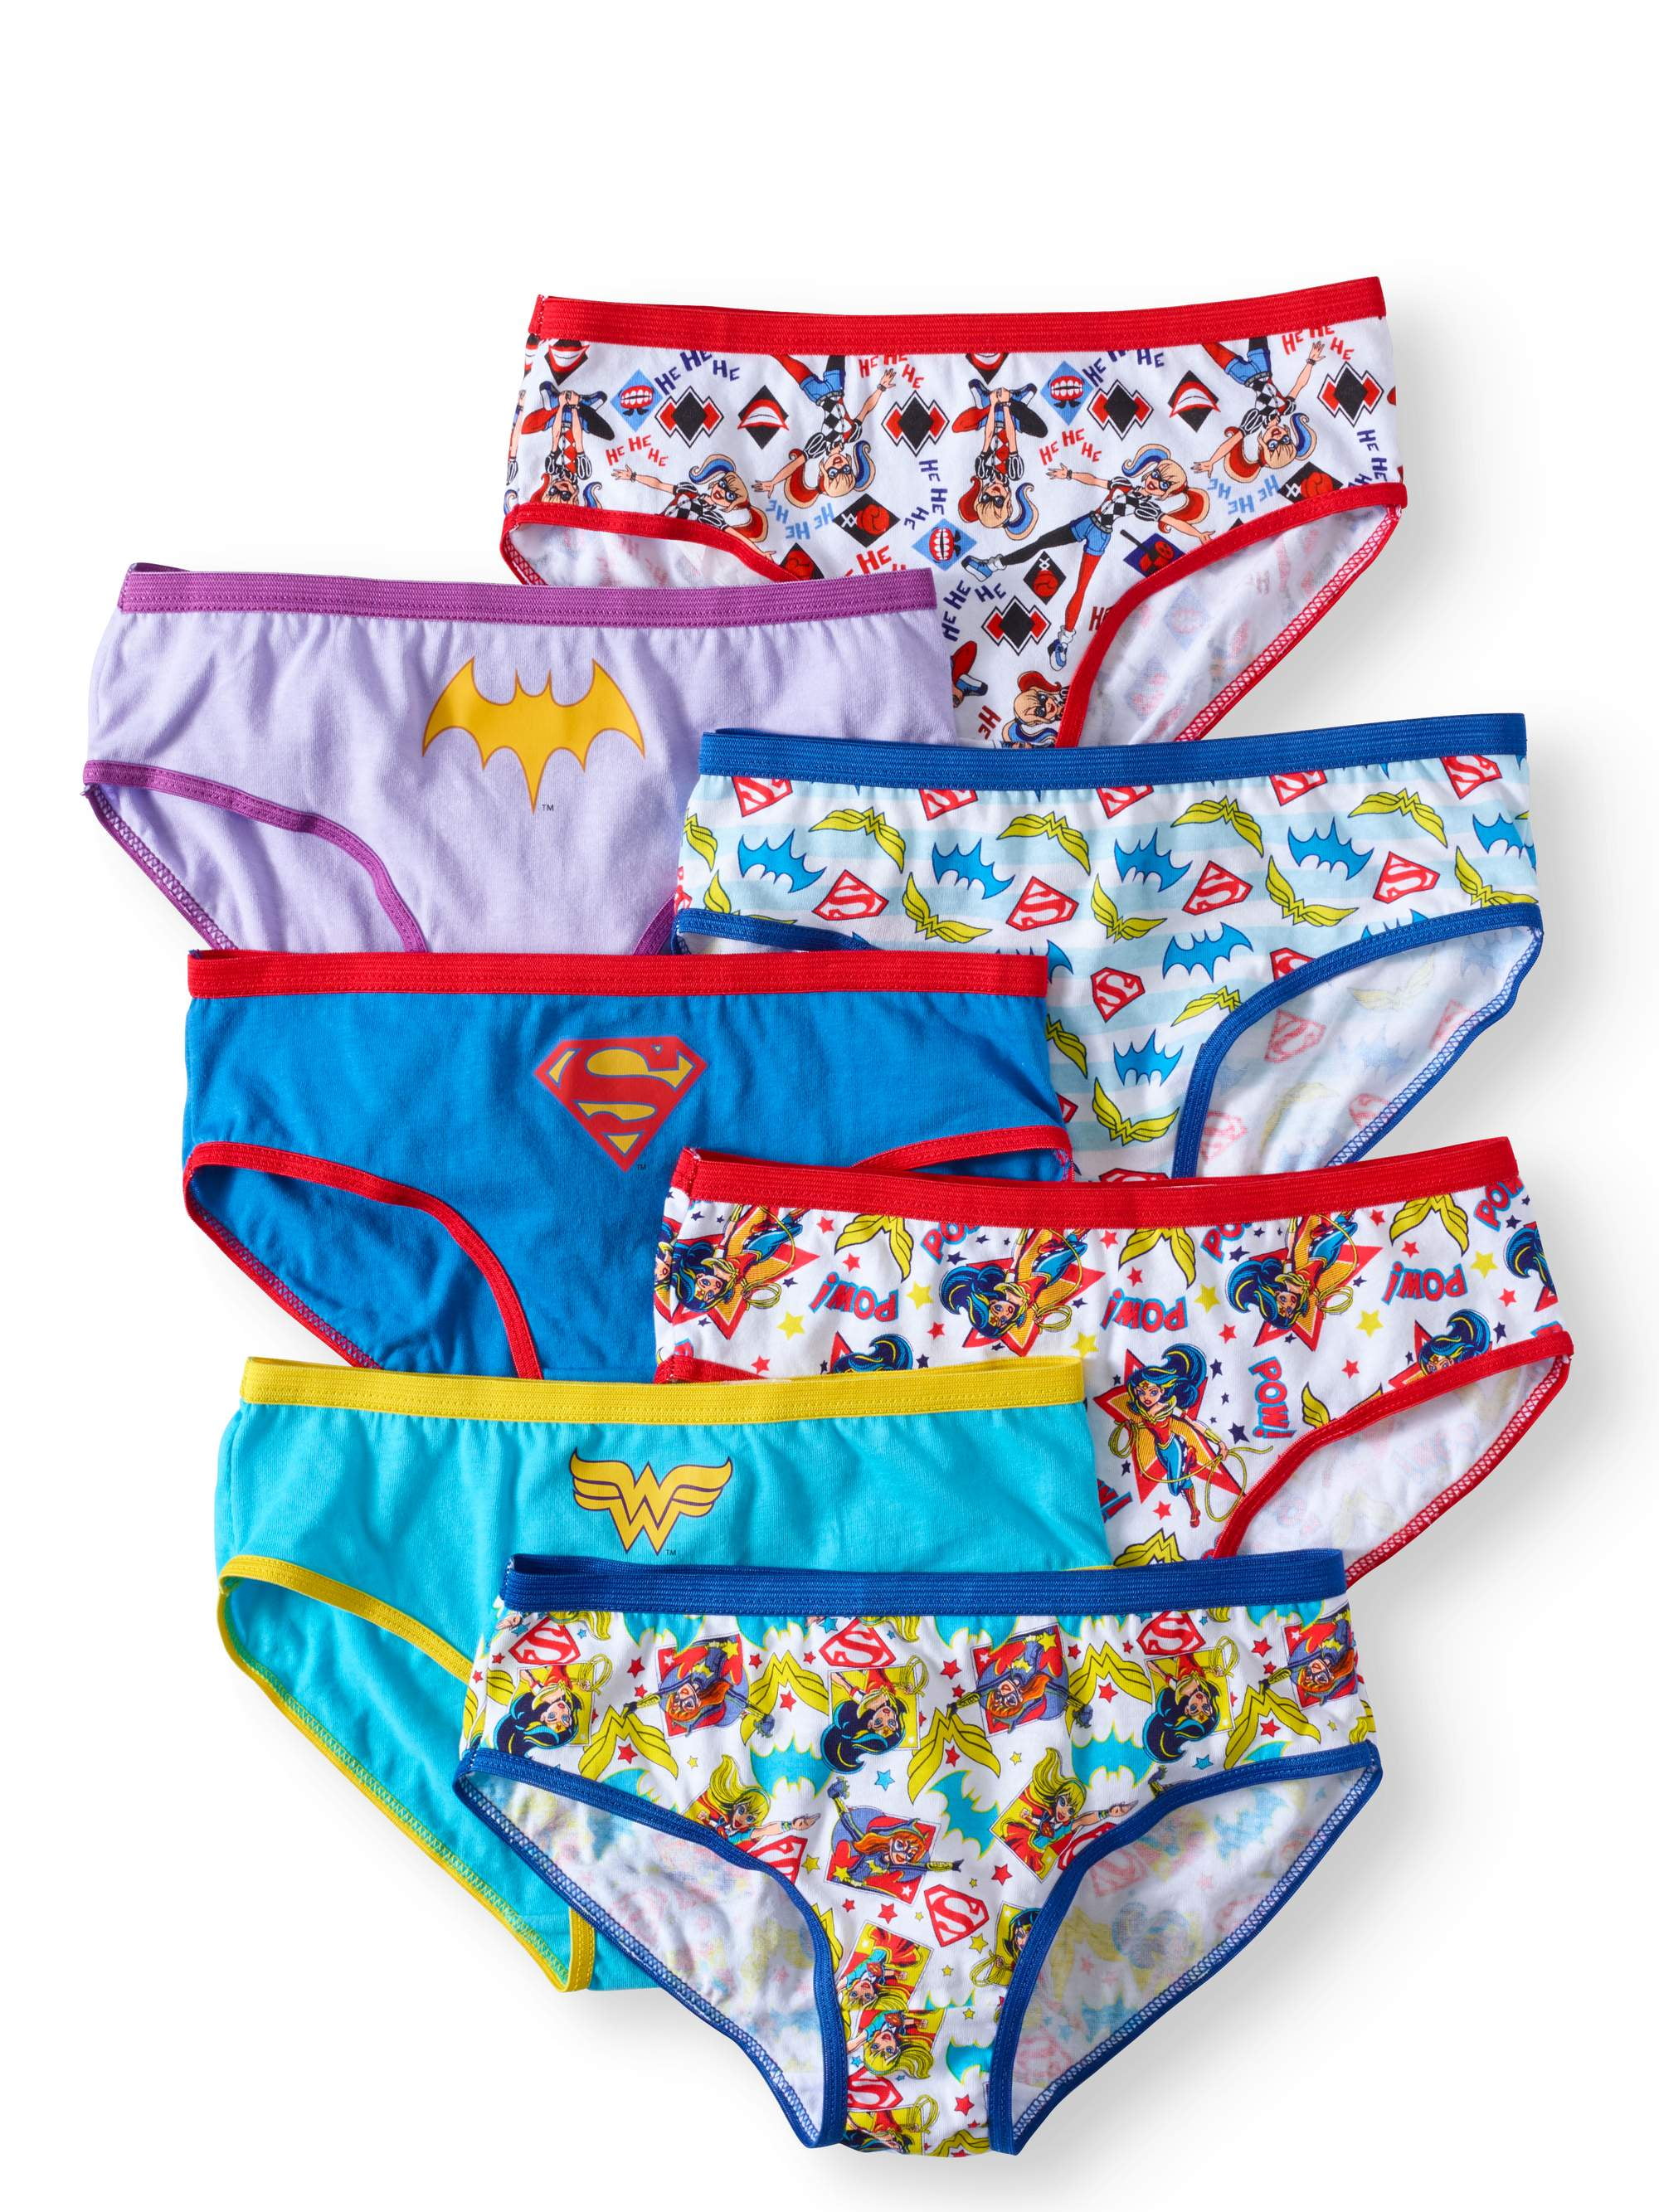 sHEROes - The BEST, wedgie proof undies for girls who like to cartwheel!  sHEROes girls school underwear is great fitting, superhero sized undies  that stay in place when you are cartwheeling or